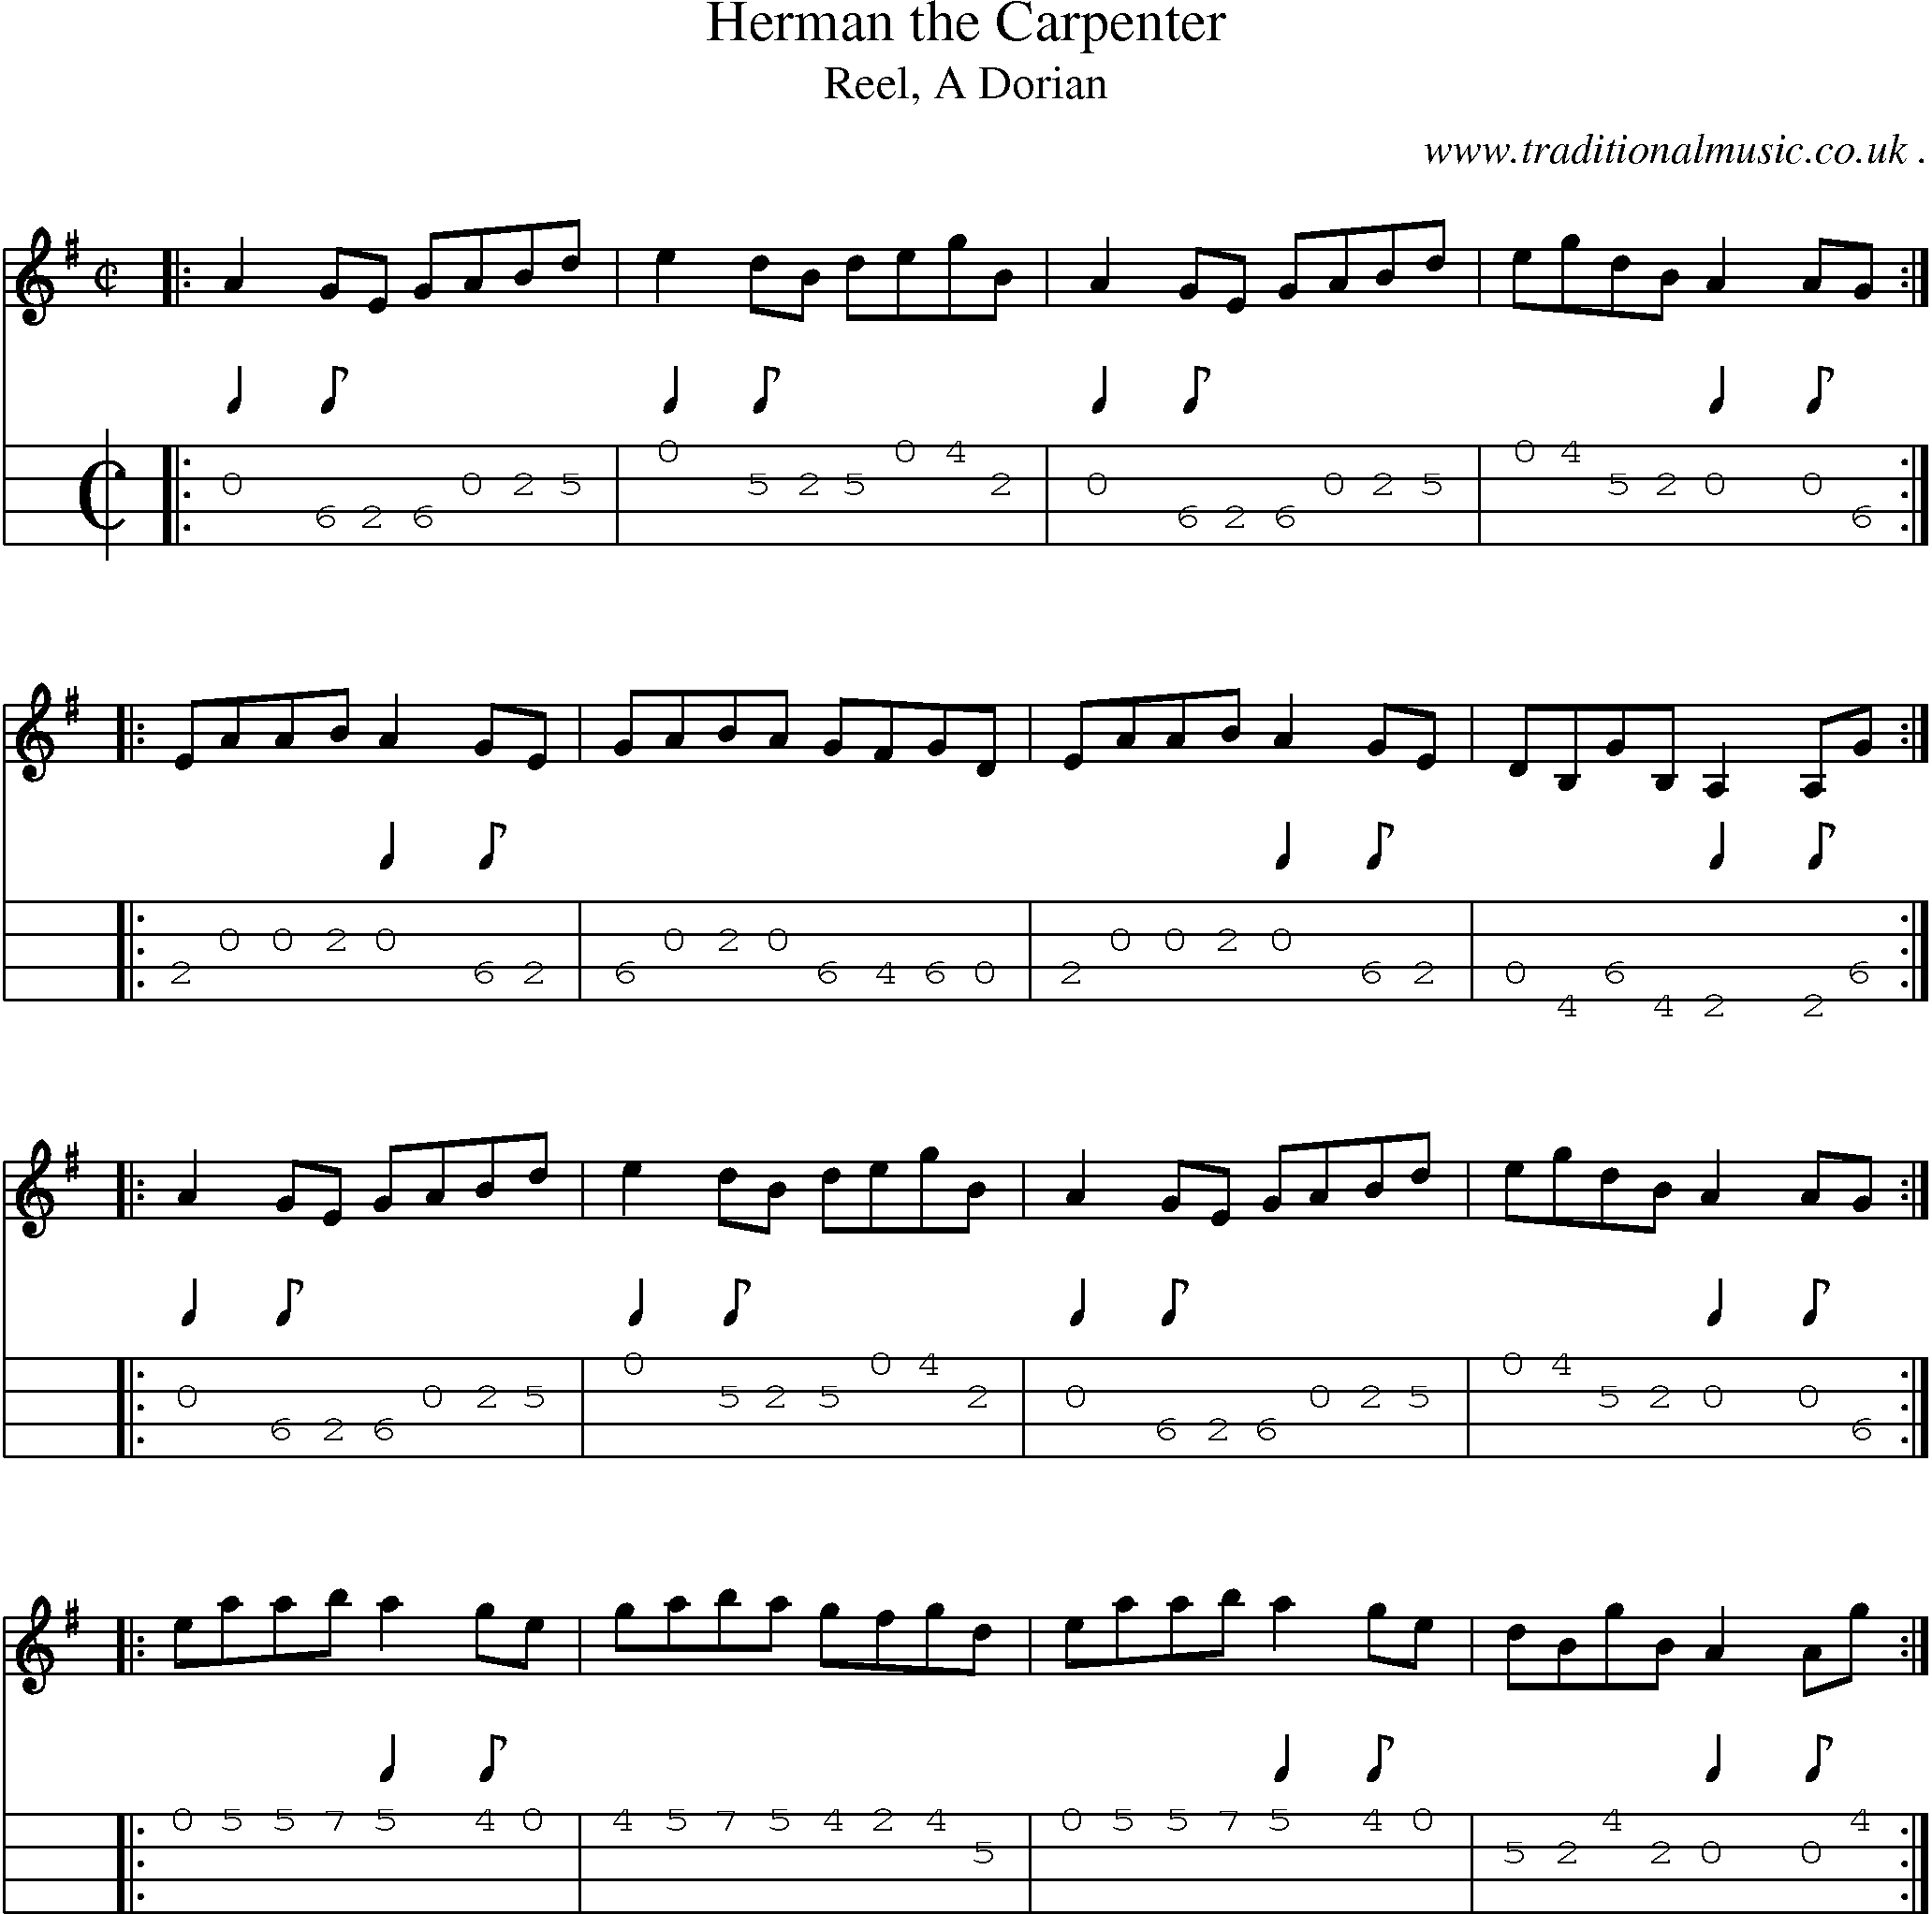 Sheet-music  score, Chords and Mandolin Tabs for Herman The Carpenter